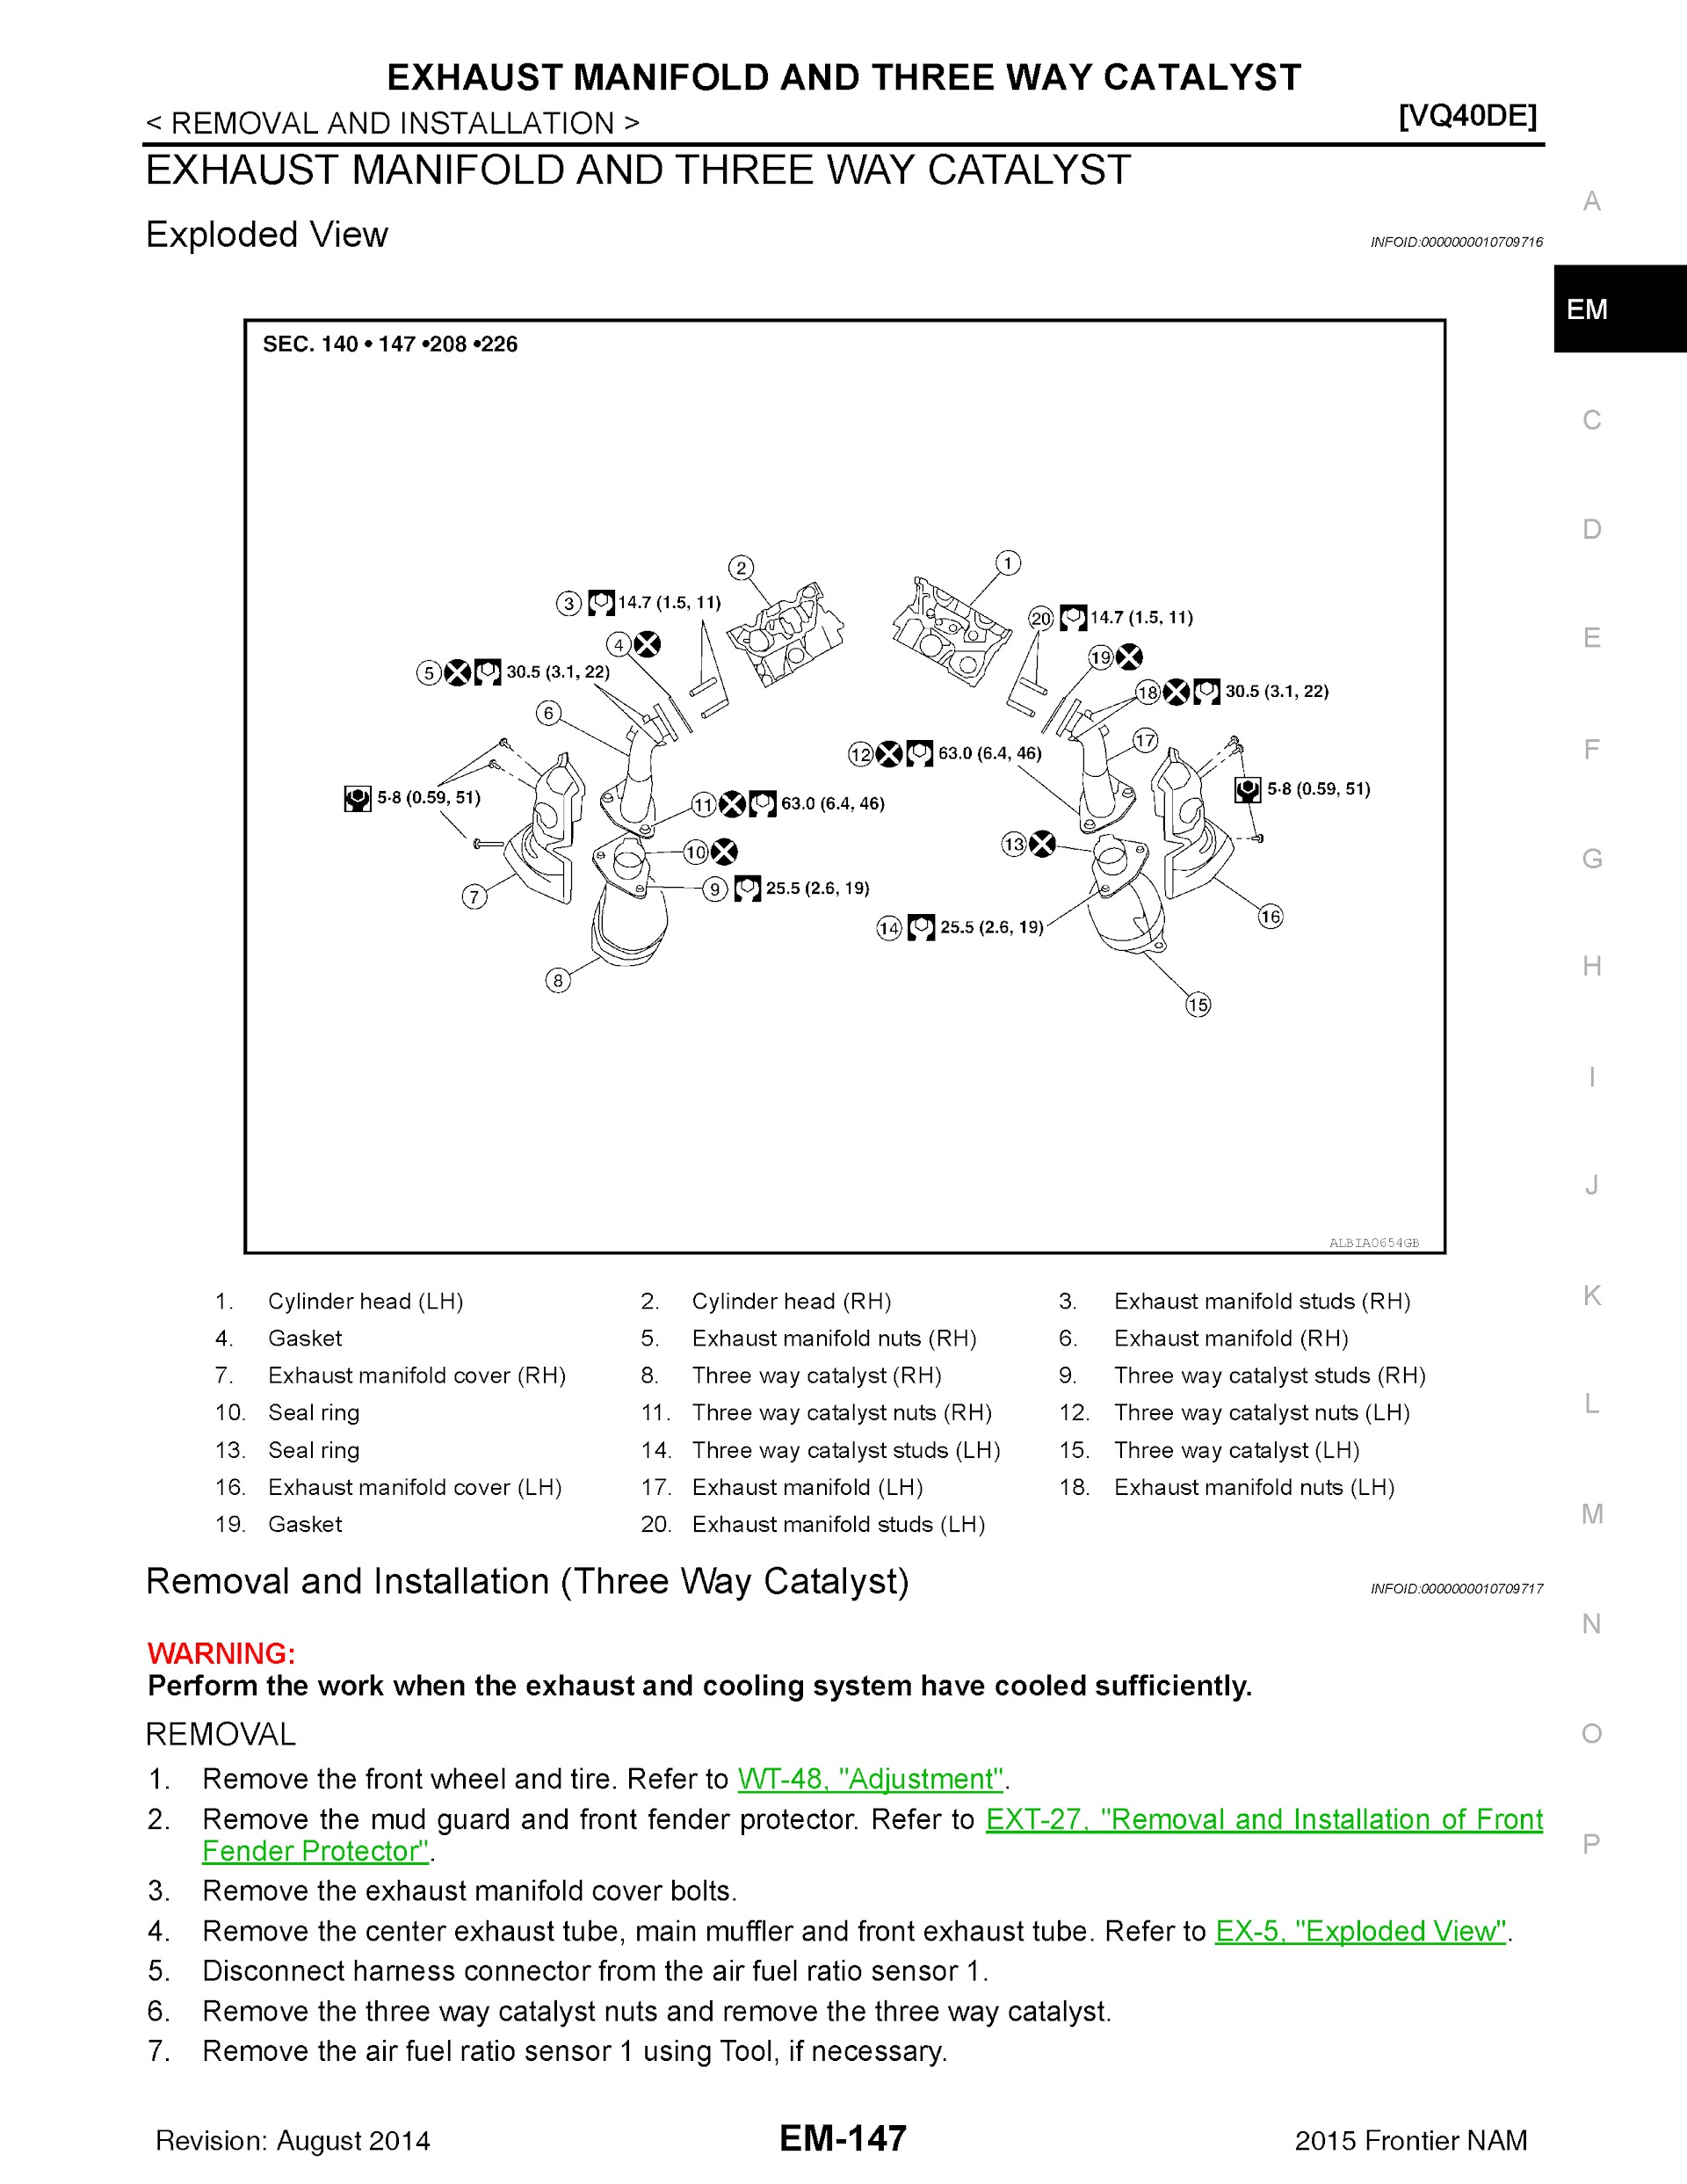 2015 Nissan Frontier Repair Manual, Exhaust Manifold and Three Way Catalyst